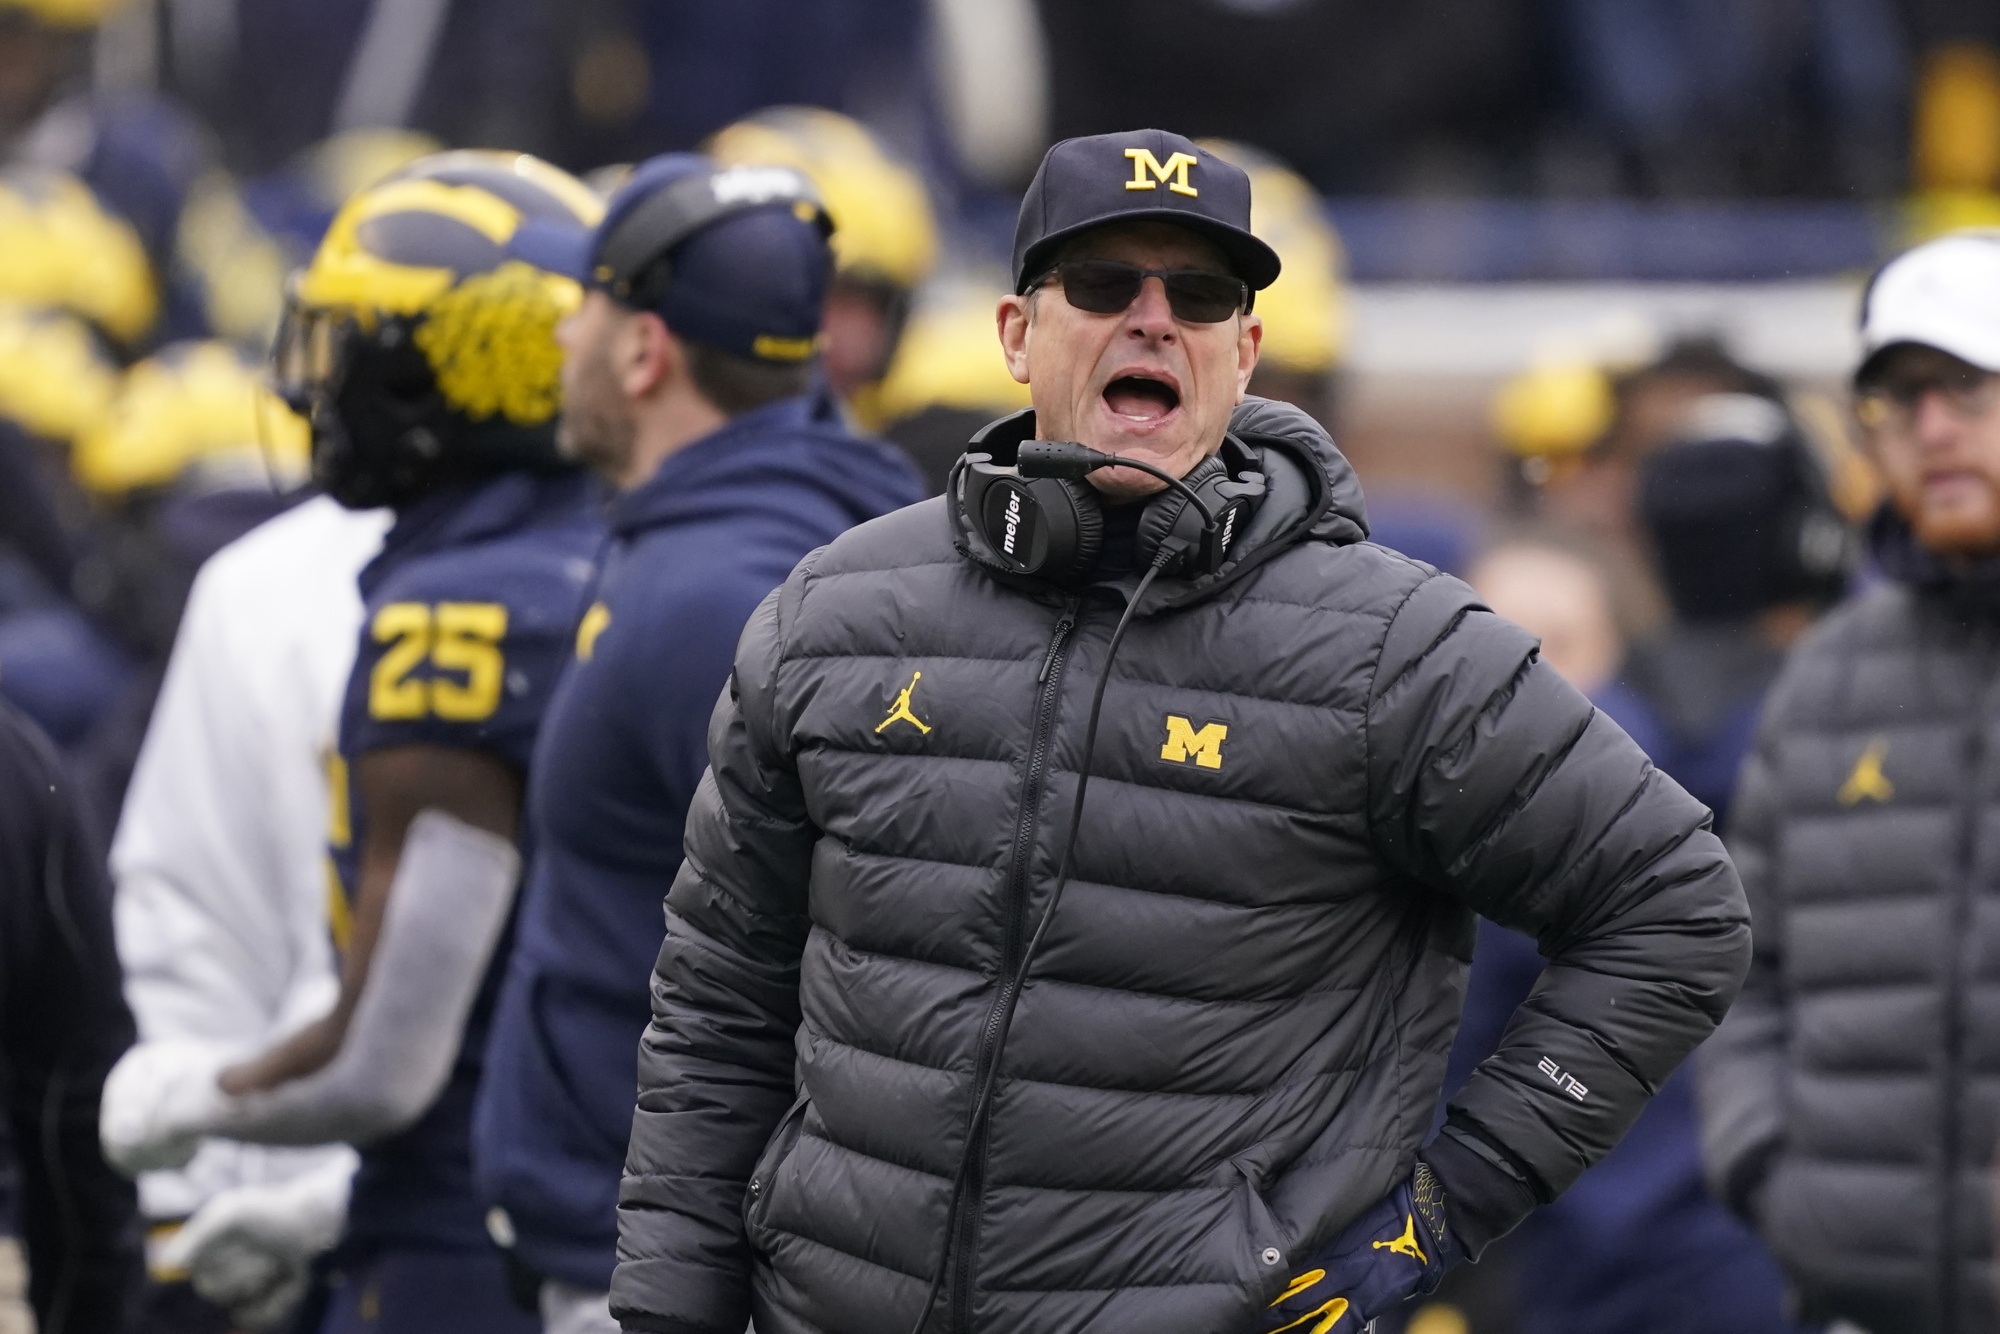 Michigan Raises Harbaugh's Pay Back to Over $7m Per Year - Bloomberg